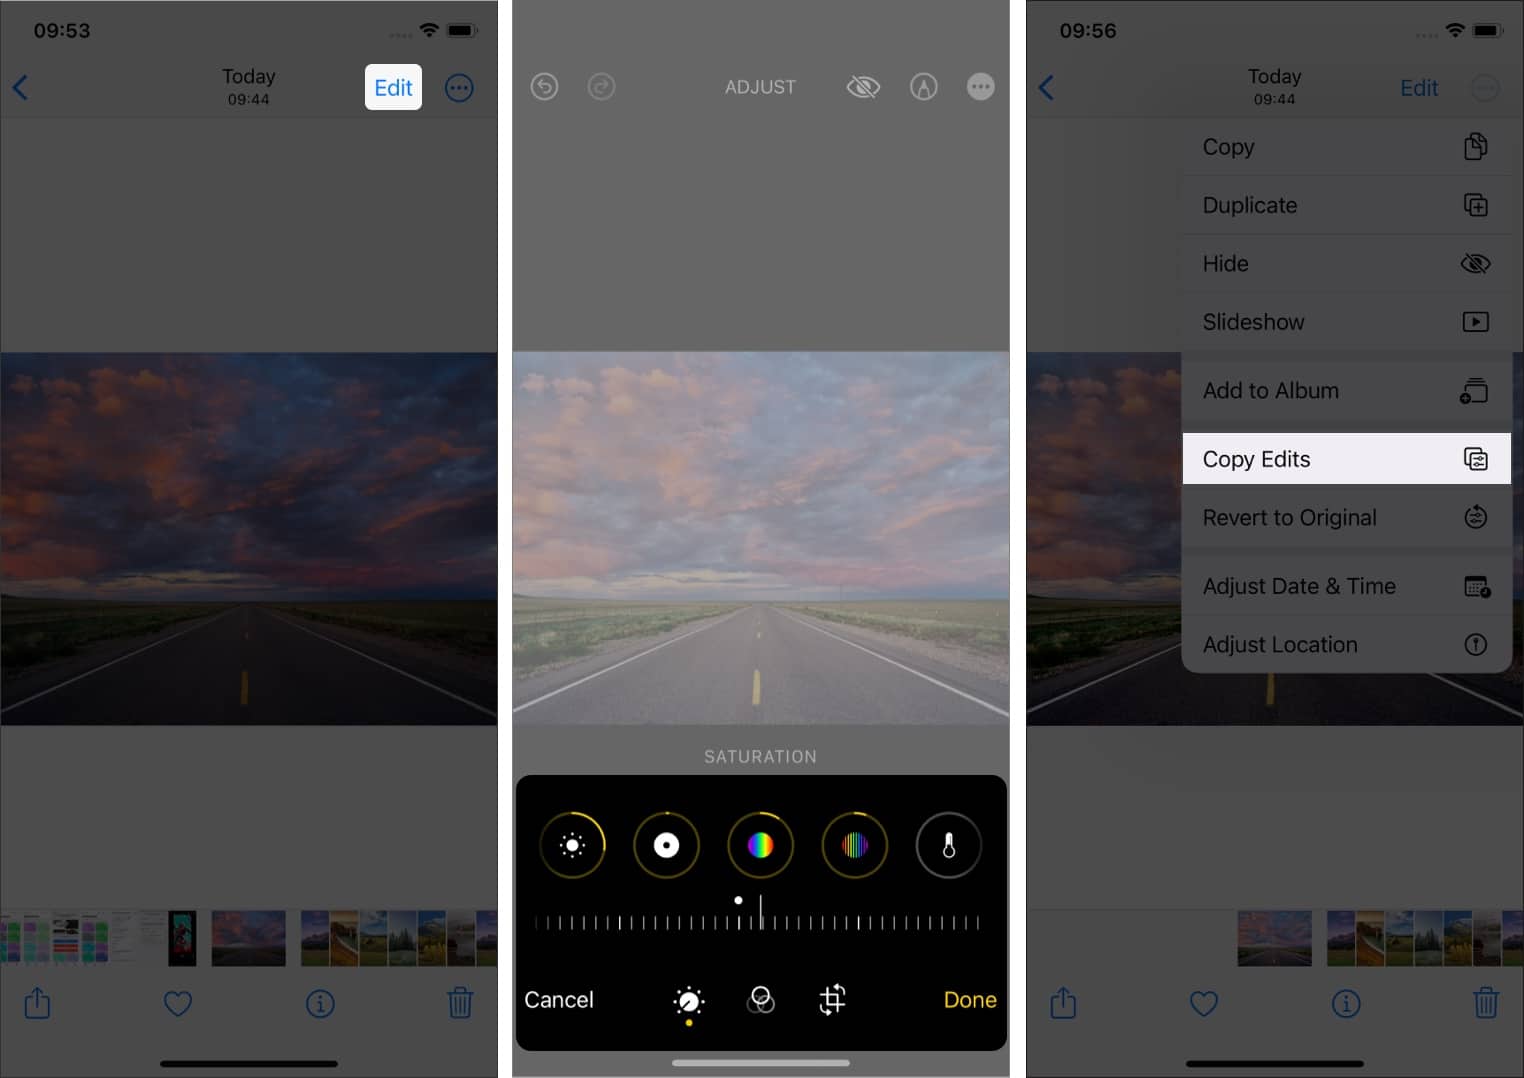 Steps to Copy and Paste edits in photos on iPhone